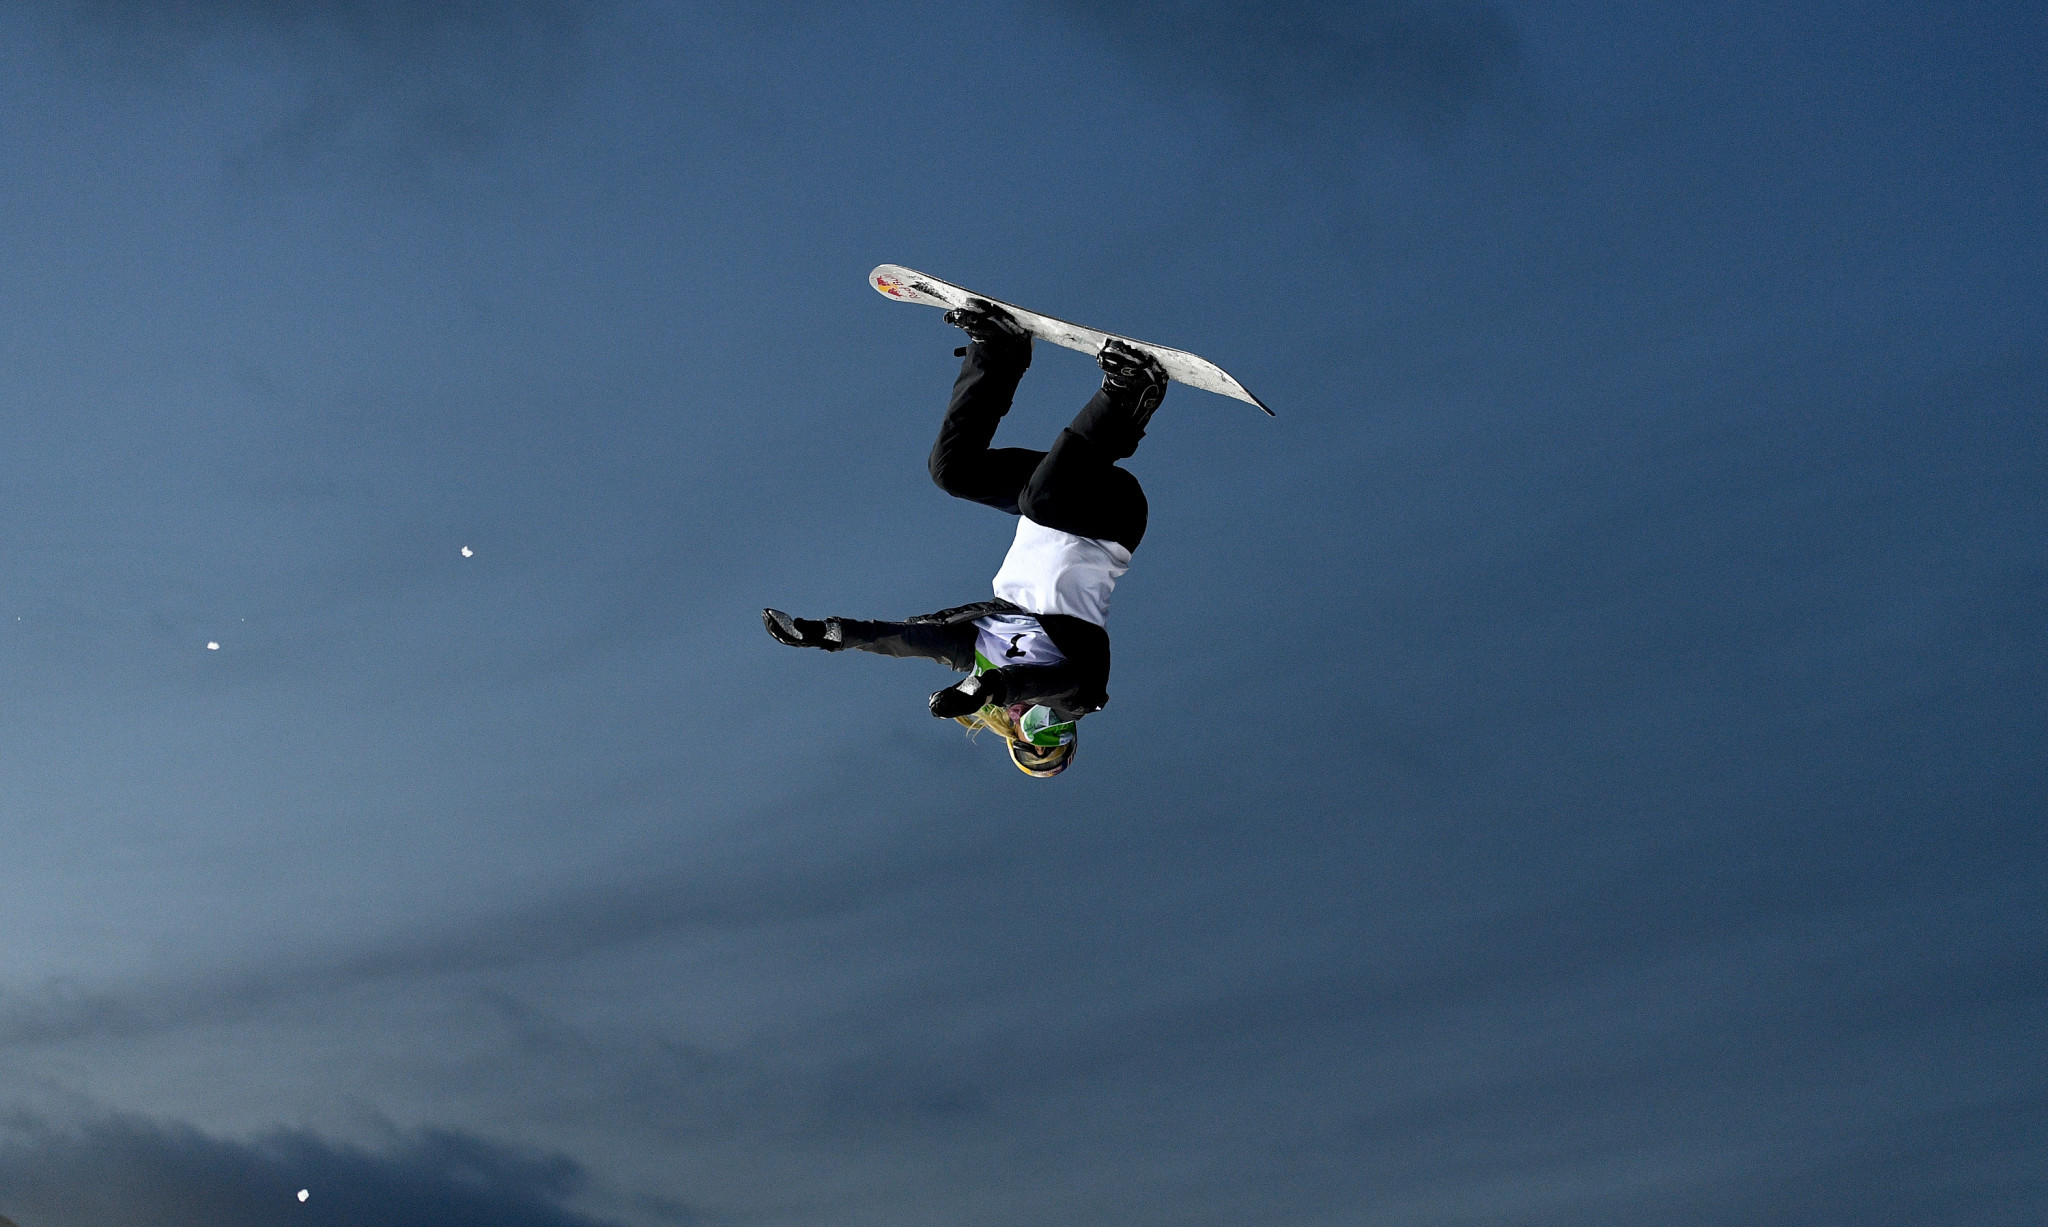 Anna Gasser dominated the women's event at the FIS Snowboard Big Air World Cup ©Getty Images